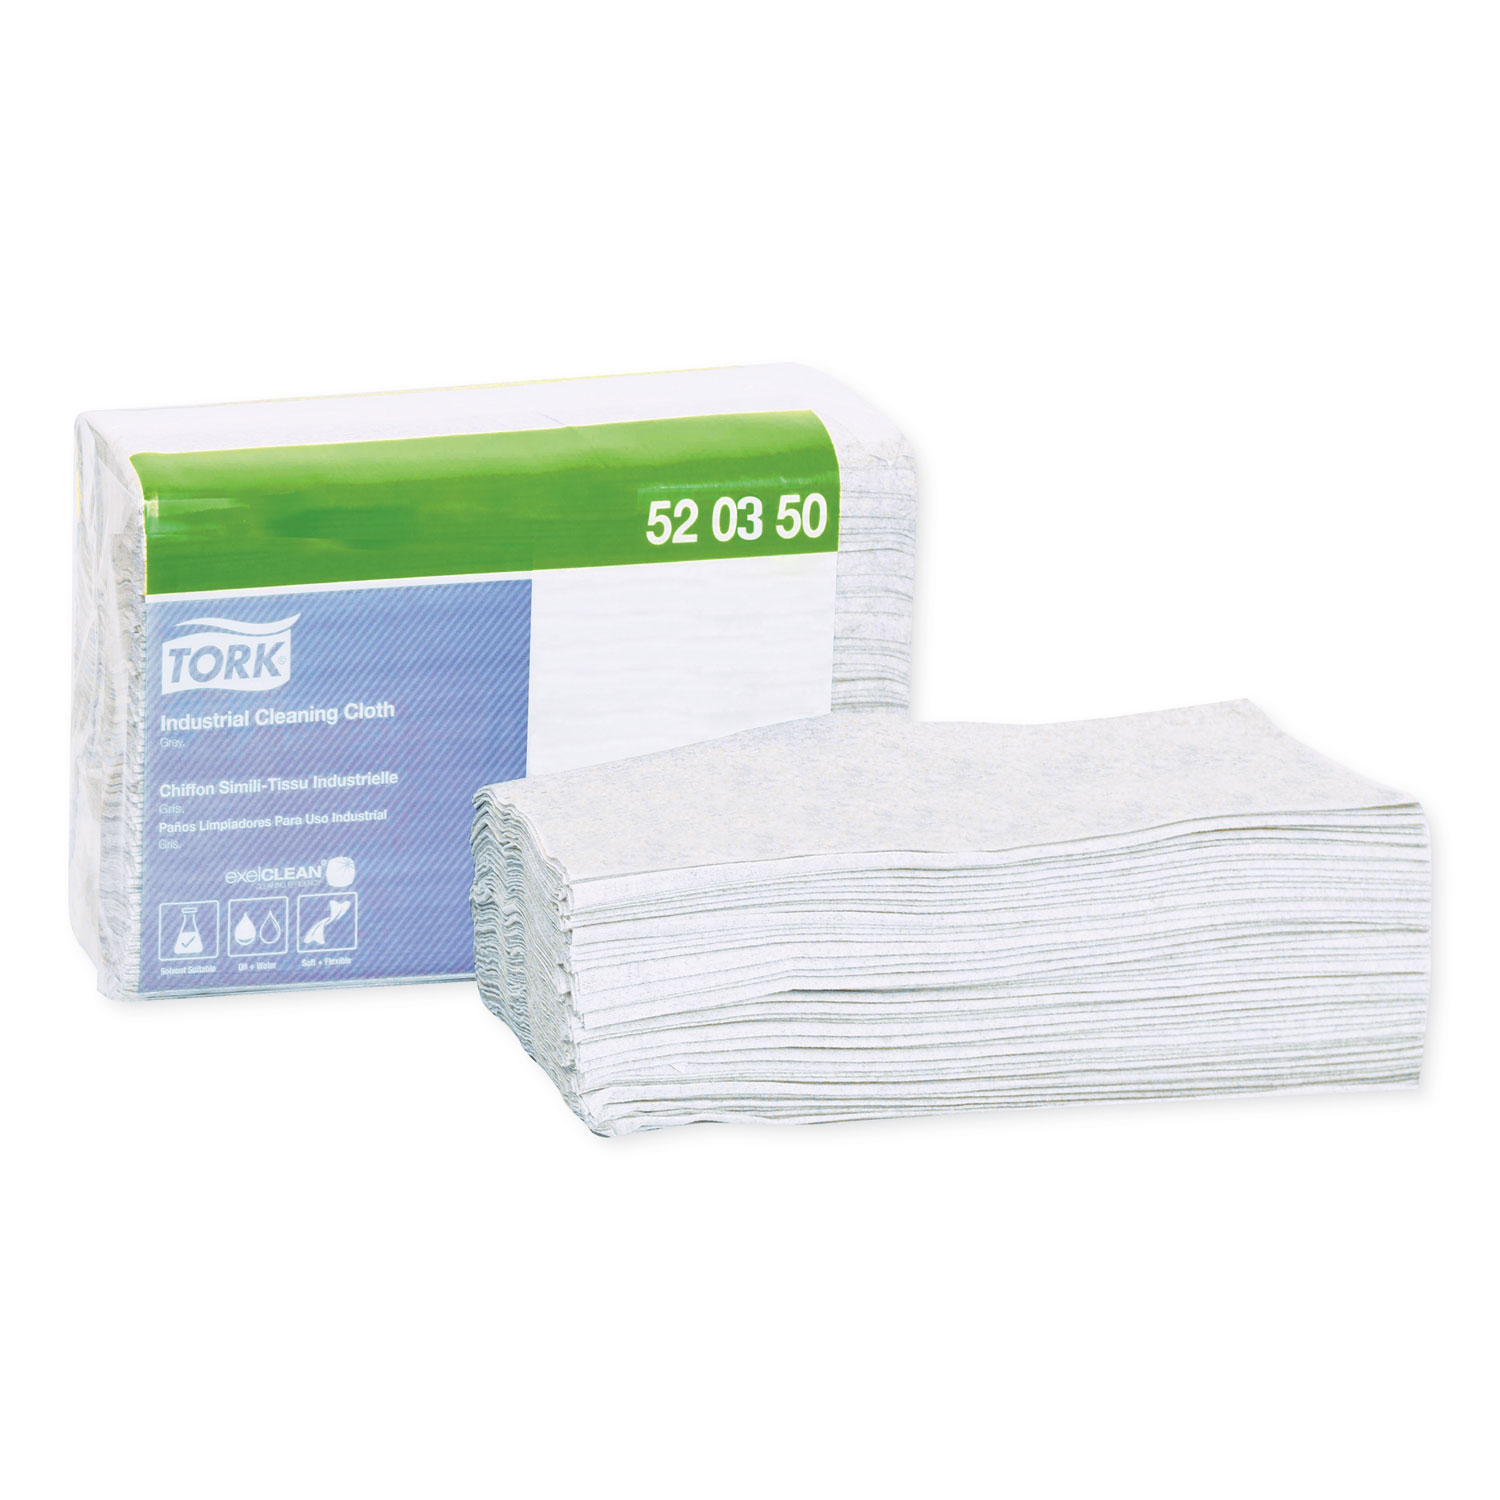  Tork 520350 Industrial Cleaning Cloths, 1-Ply, 12.6 x 15.16, Gray, 55/Pack, 8 Packs/Carton (TRK520350) 